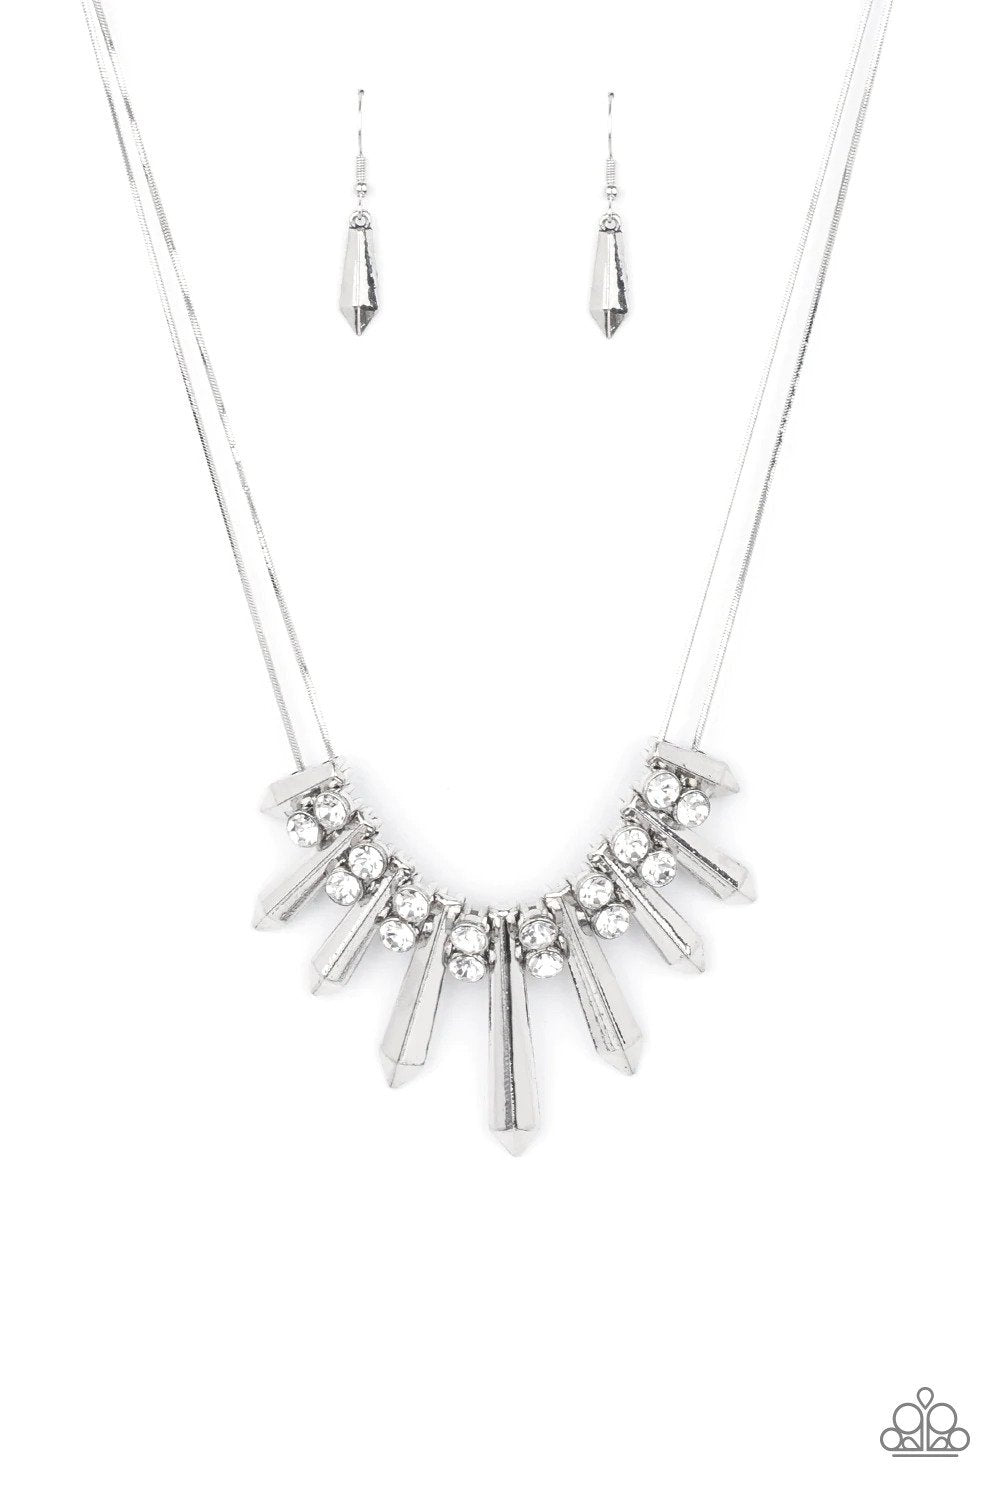 Dangerous Dazzle White Necklace - Paparazzi Accessories- lightbox - CarasShop.com - $5 Jewelry by Cara Jewels